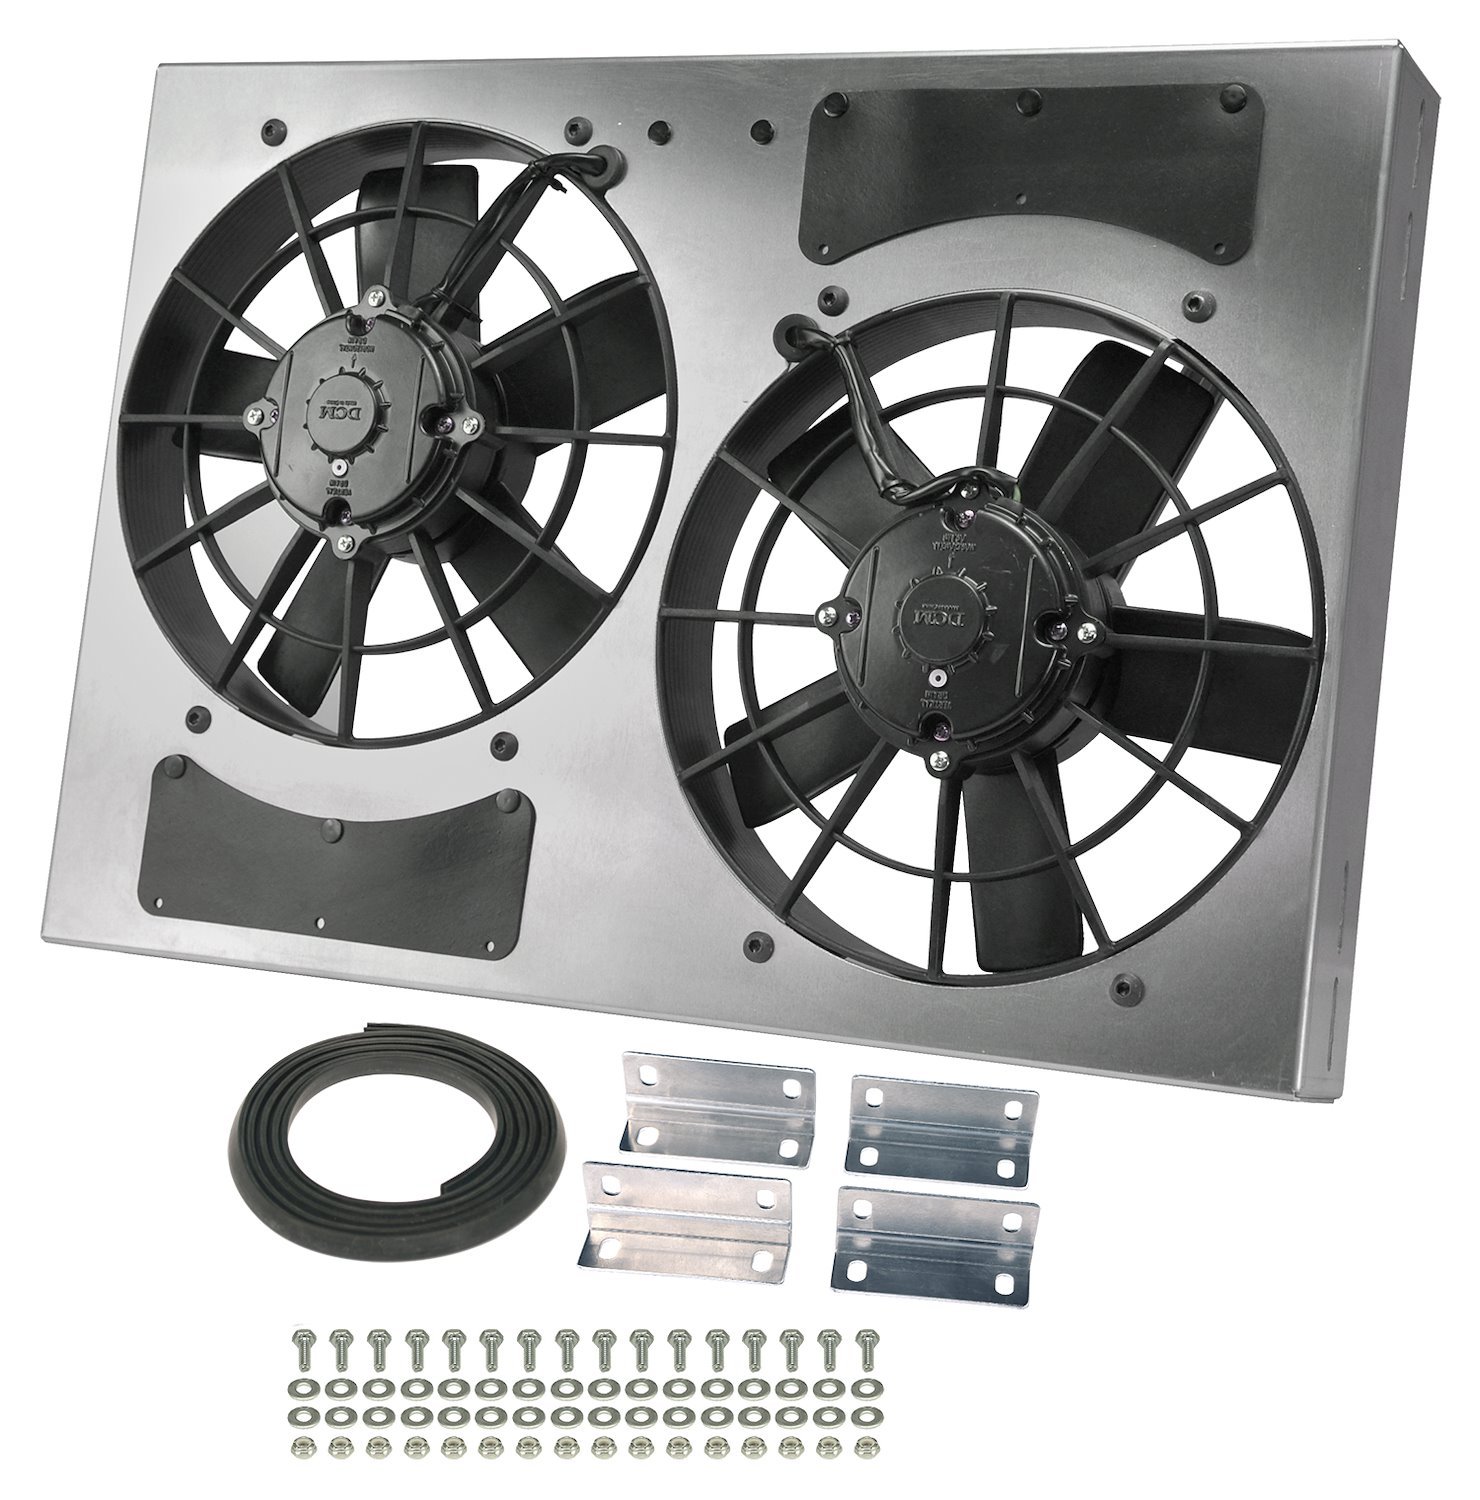 High-Output Dual Fan Assembly CFM: 3750